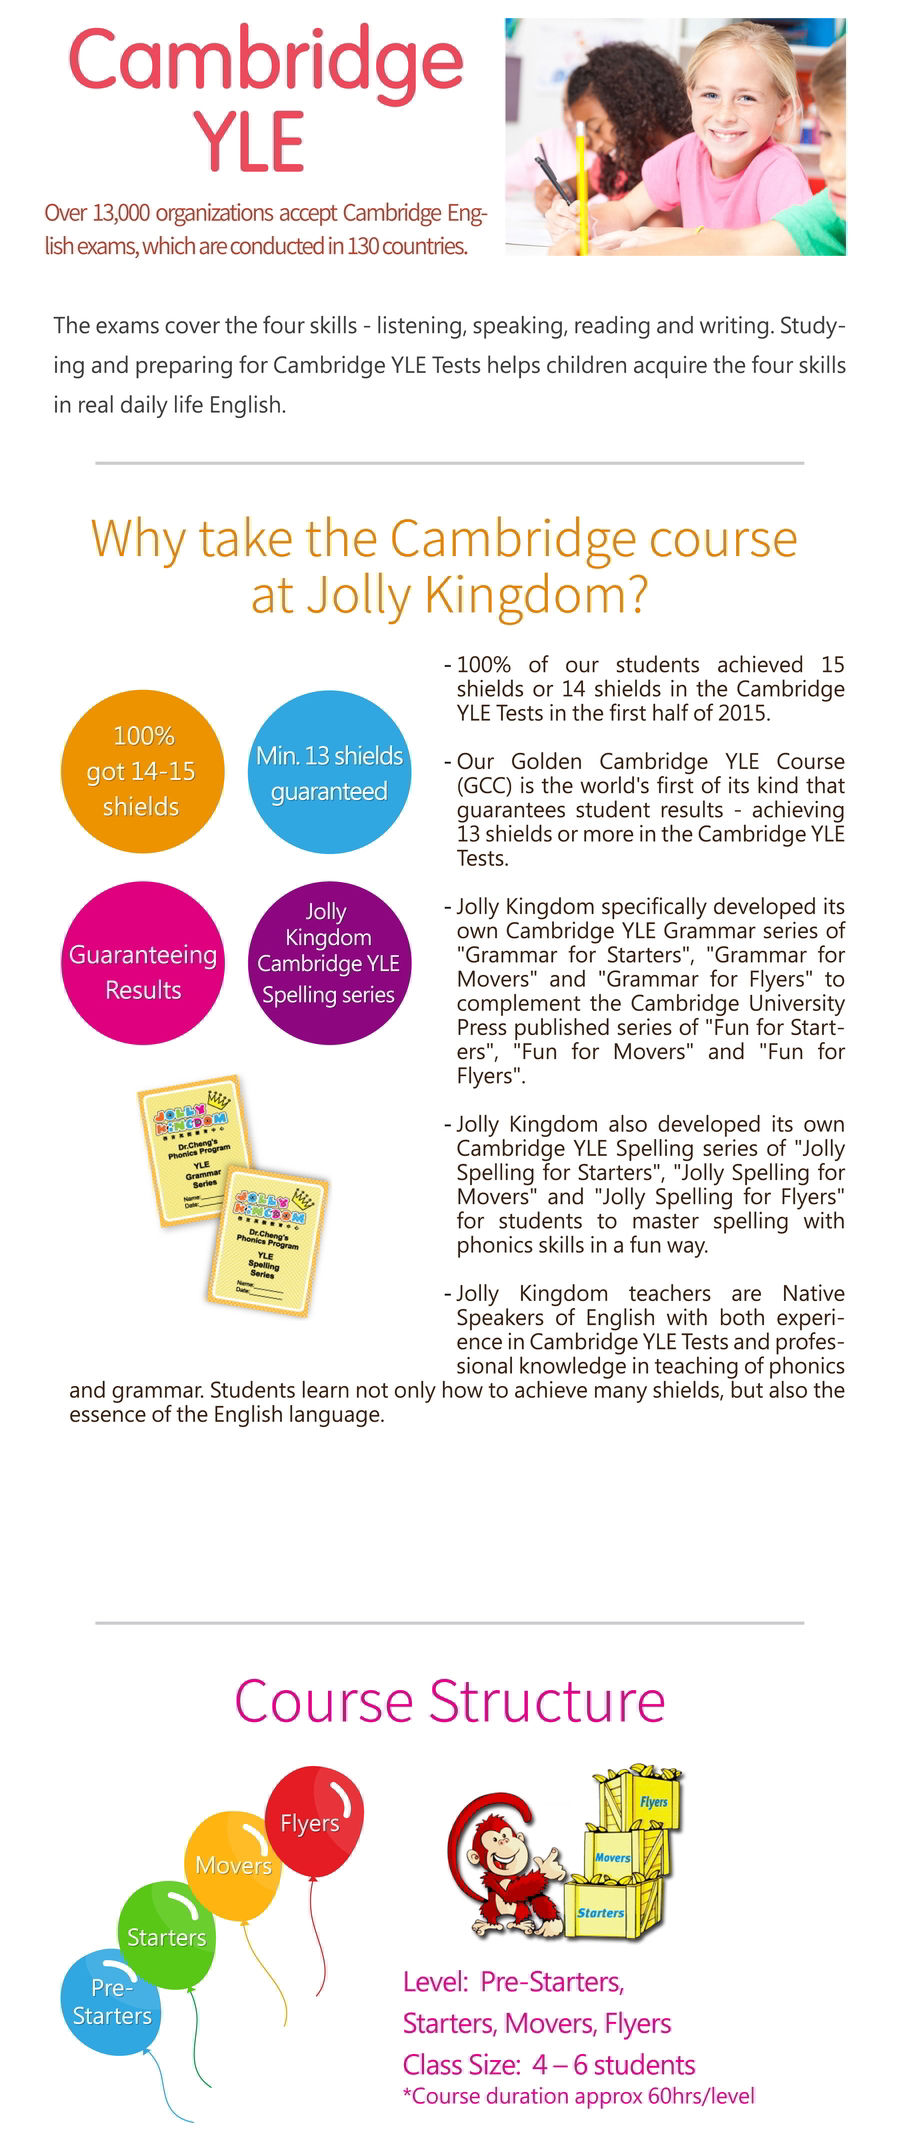 Jolly Kingdom specifically develops its own Cambridge YLE Grammar series of 